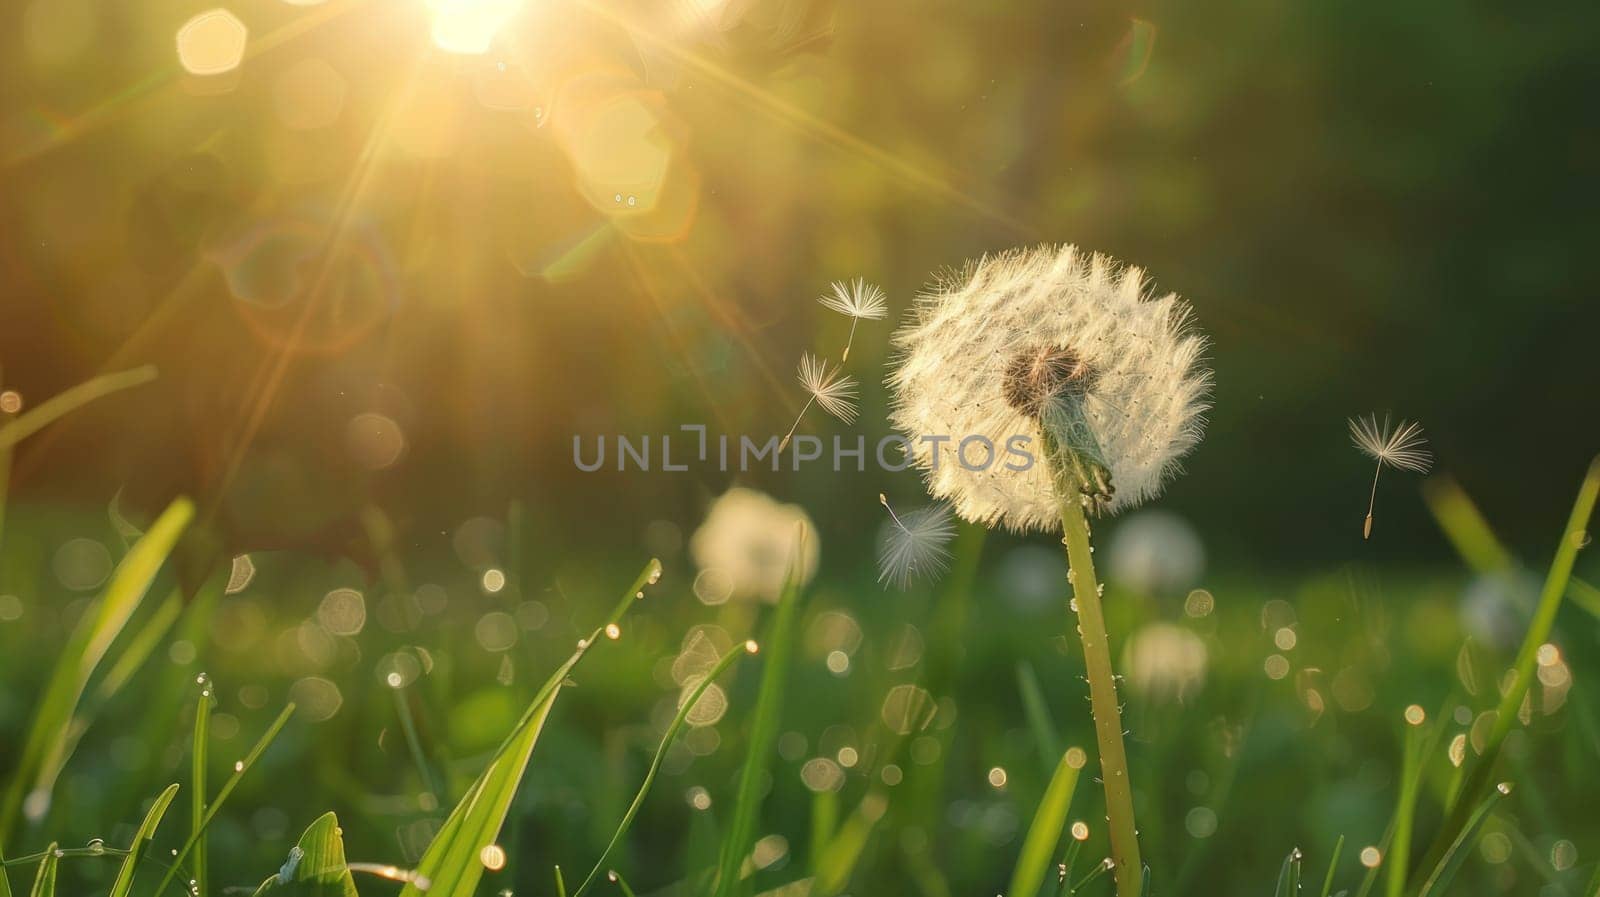 Dandelion in the Wind on Green Grass Spring Nature Background with Sun Rays and Bokeh Effect Concept Serene Natural Beauty.